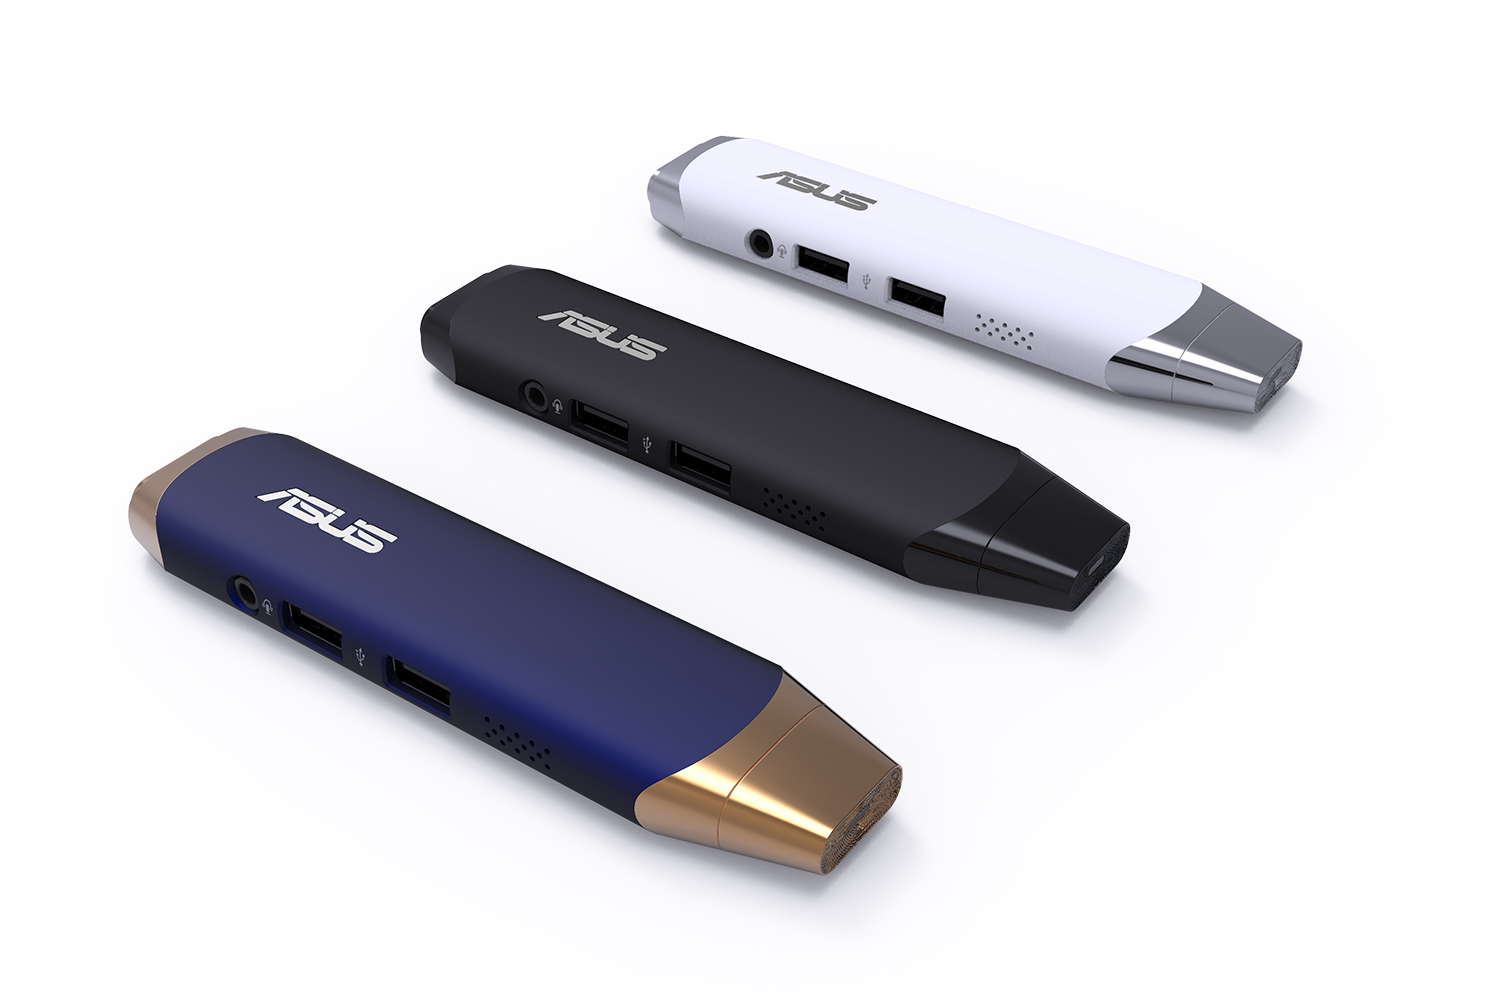 asus announces water cooled gaming laptop at ifa 2015 vivostick pc 3 colors